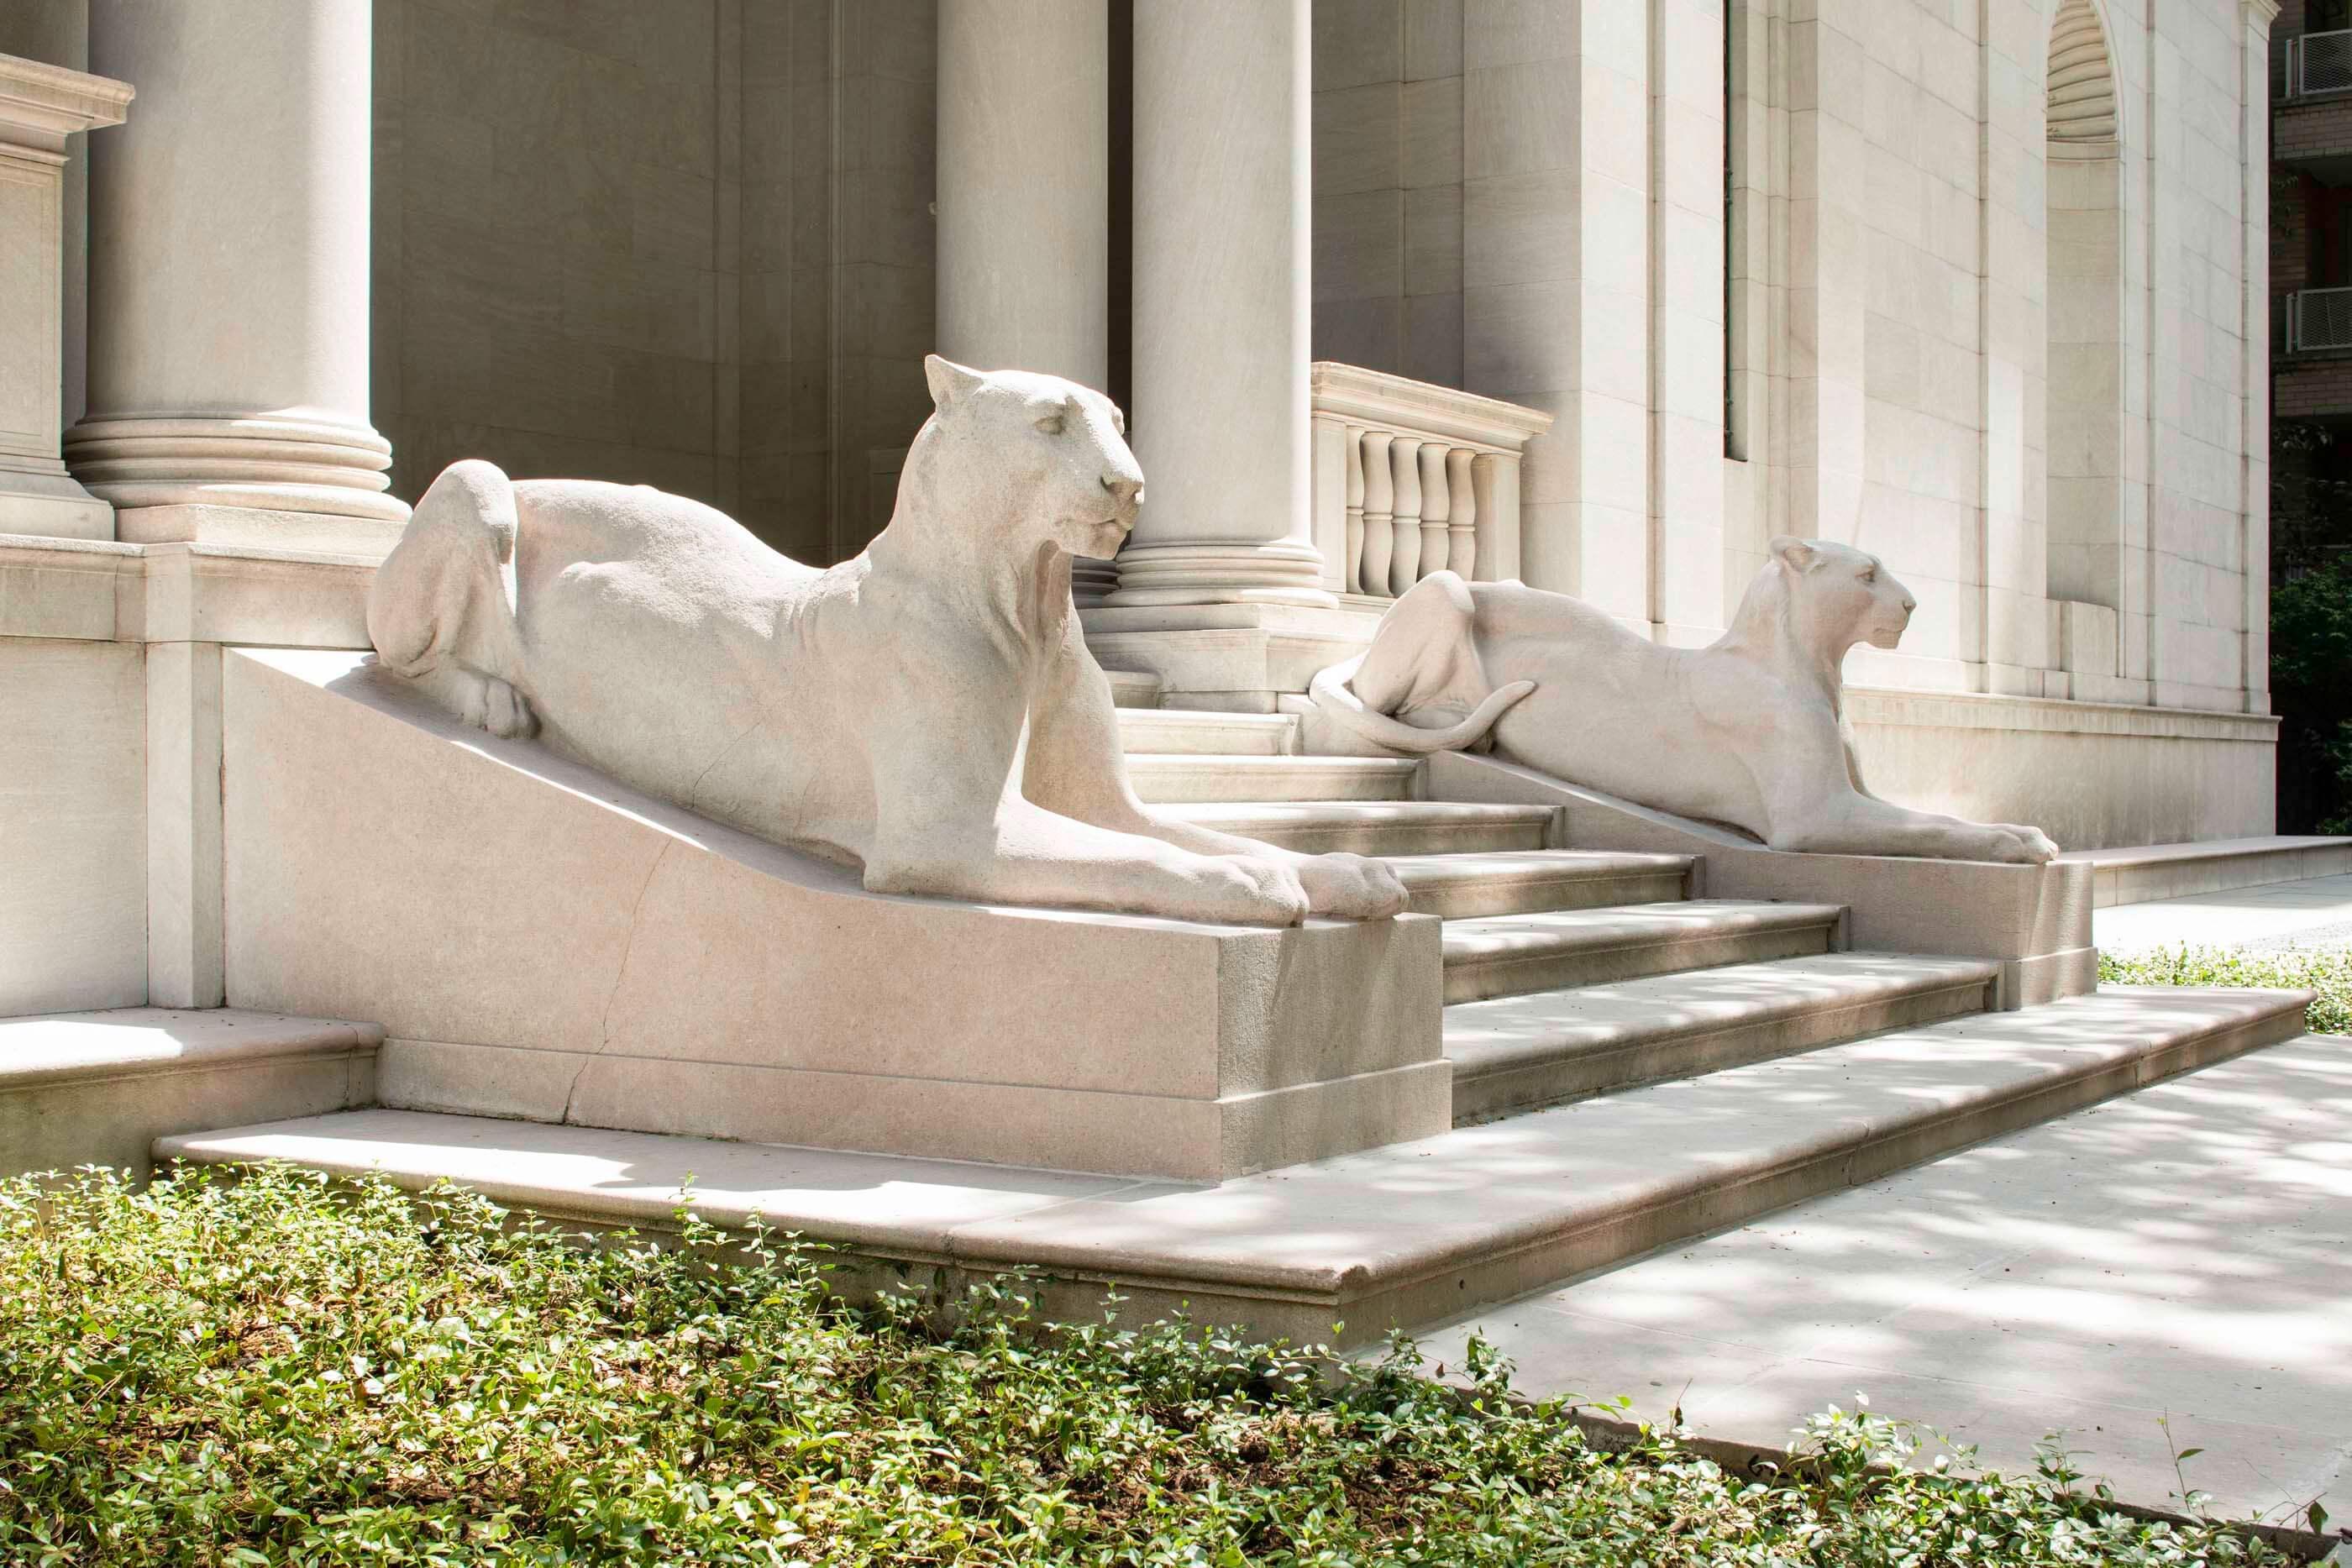 Restored lioness in front of Morgan library